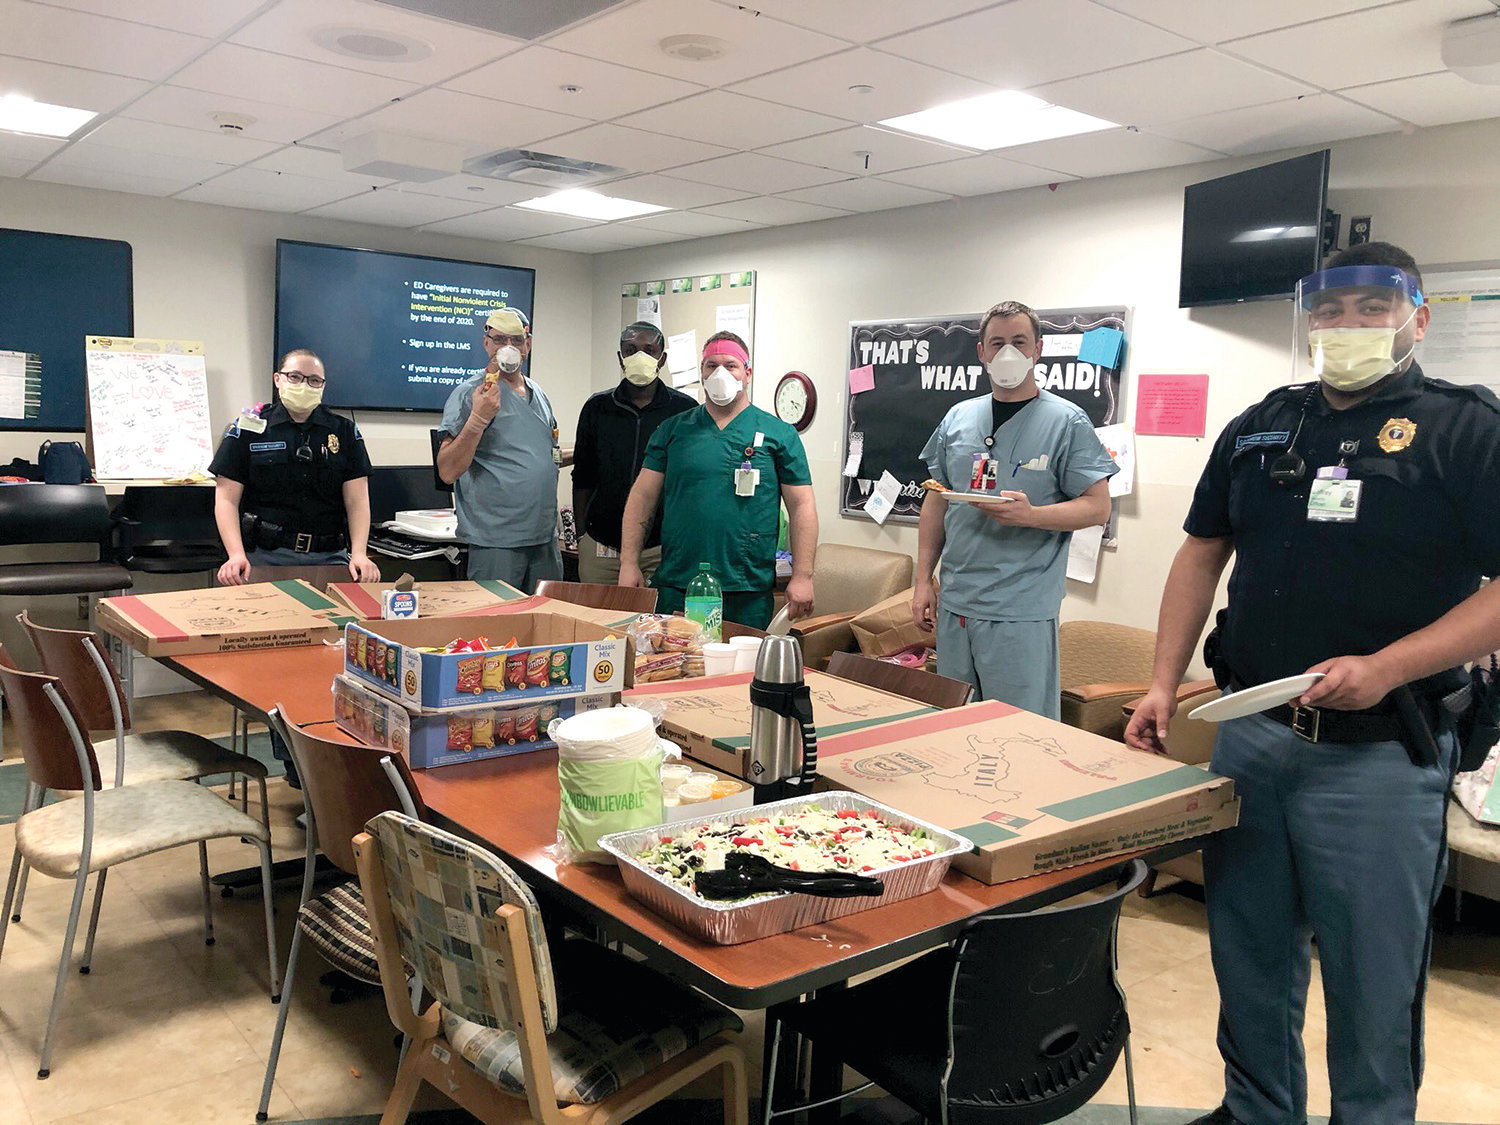 Last Saturday, Toarmina’s thanked Sparrow Health System first responders with a free round of pizzas. They plan to continue providing free food to Sparrow health professionals throughout this week.